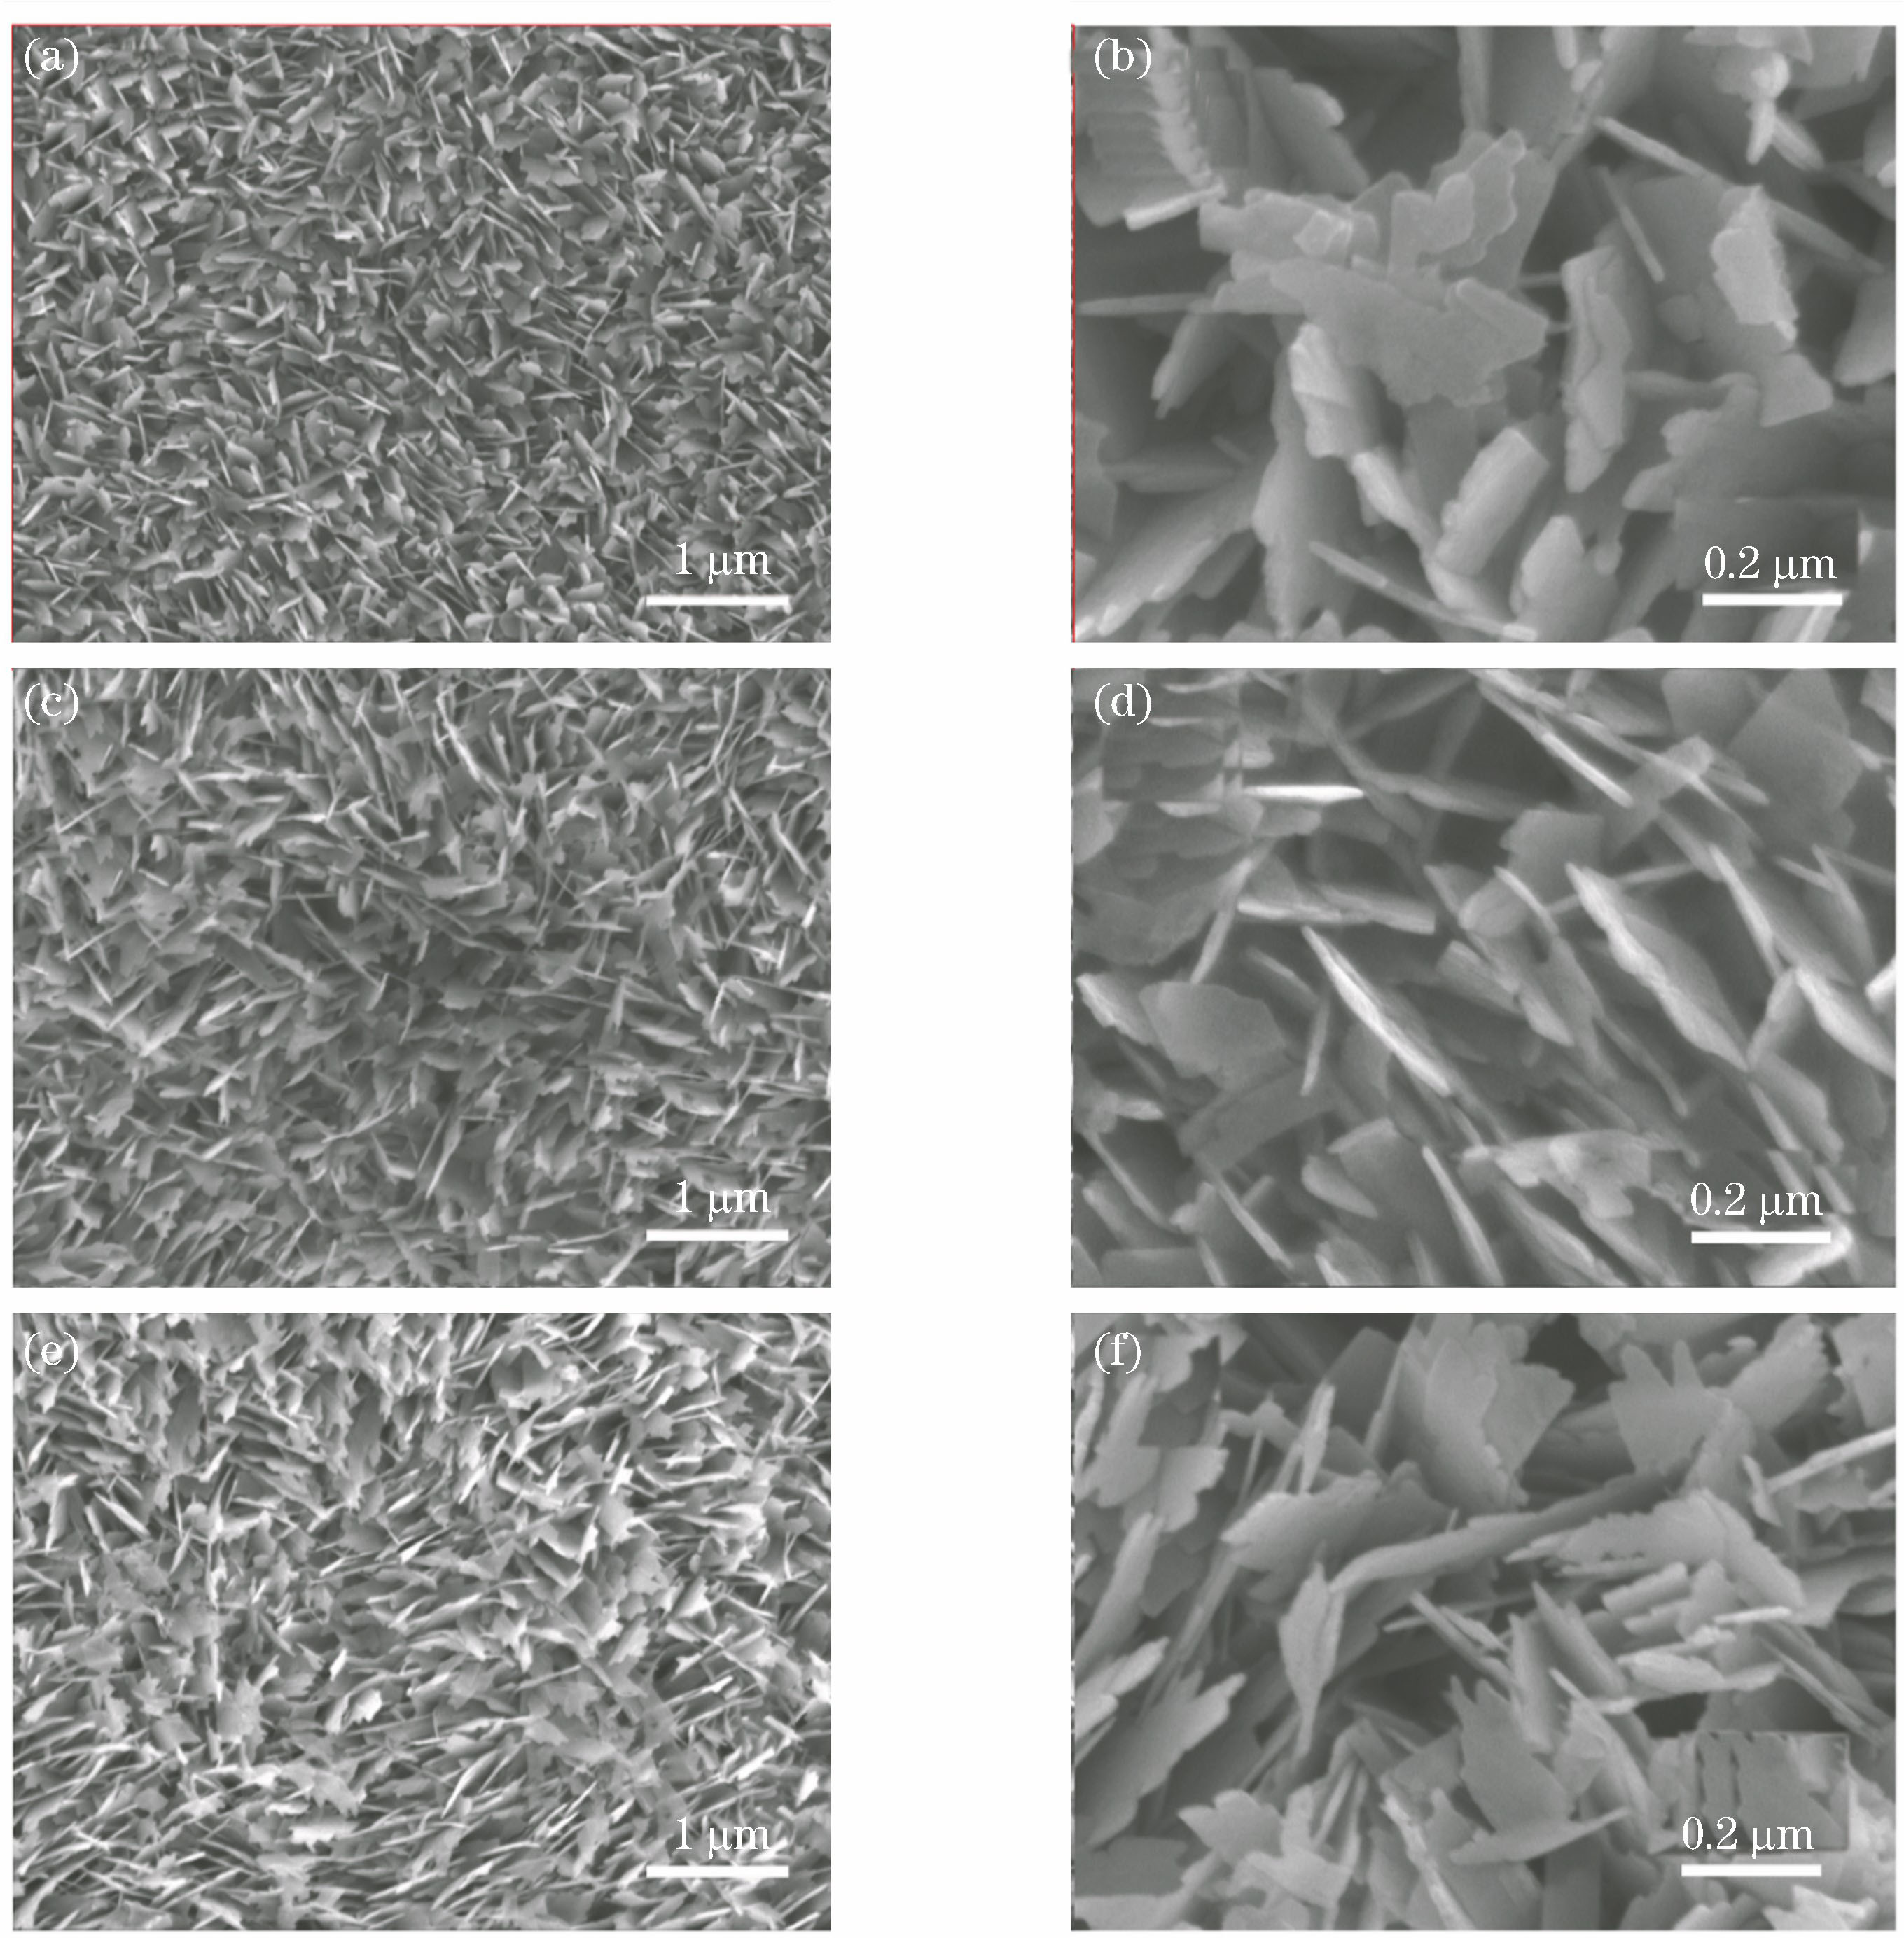 Scanning electron microscope (SEM) morphologies of CuO nanosheet arrays synthesized under different reaction time of water bath. (a) 5 min, low power; (b) 5 min, high power; (c) 10 min, low power; (d) 10 min, high power; (e) 15 min, low power; (f) 15 min, high power